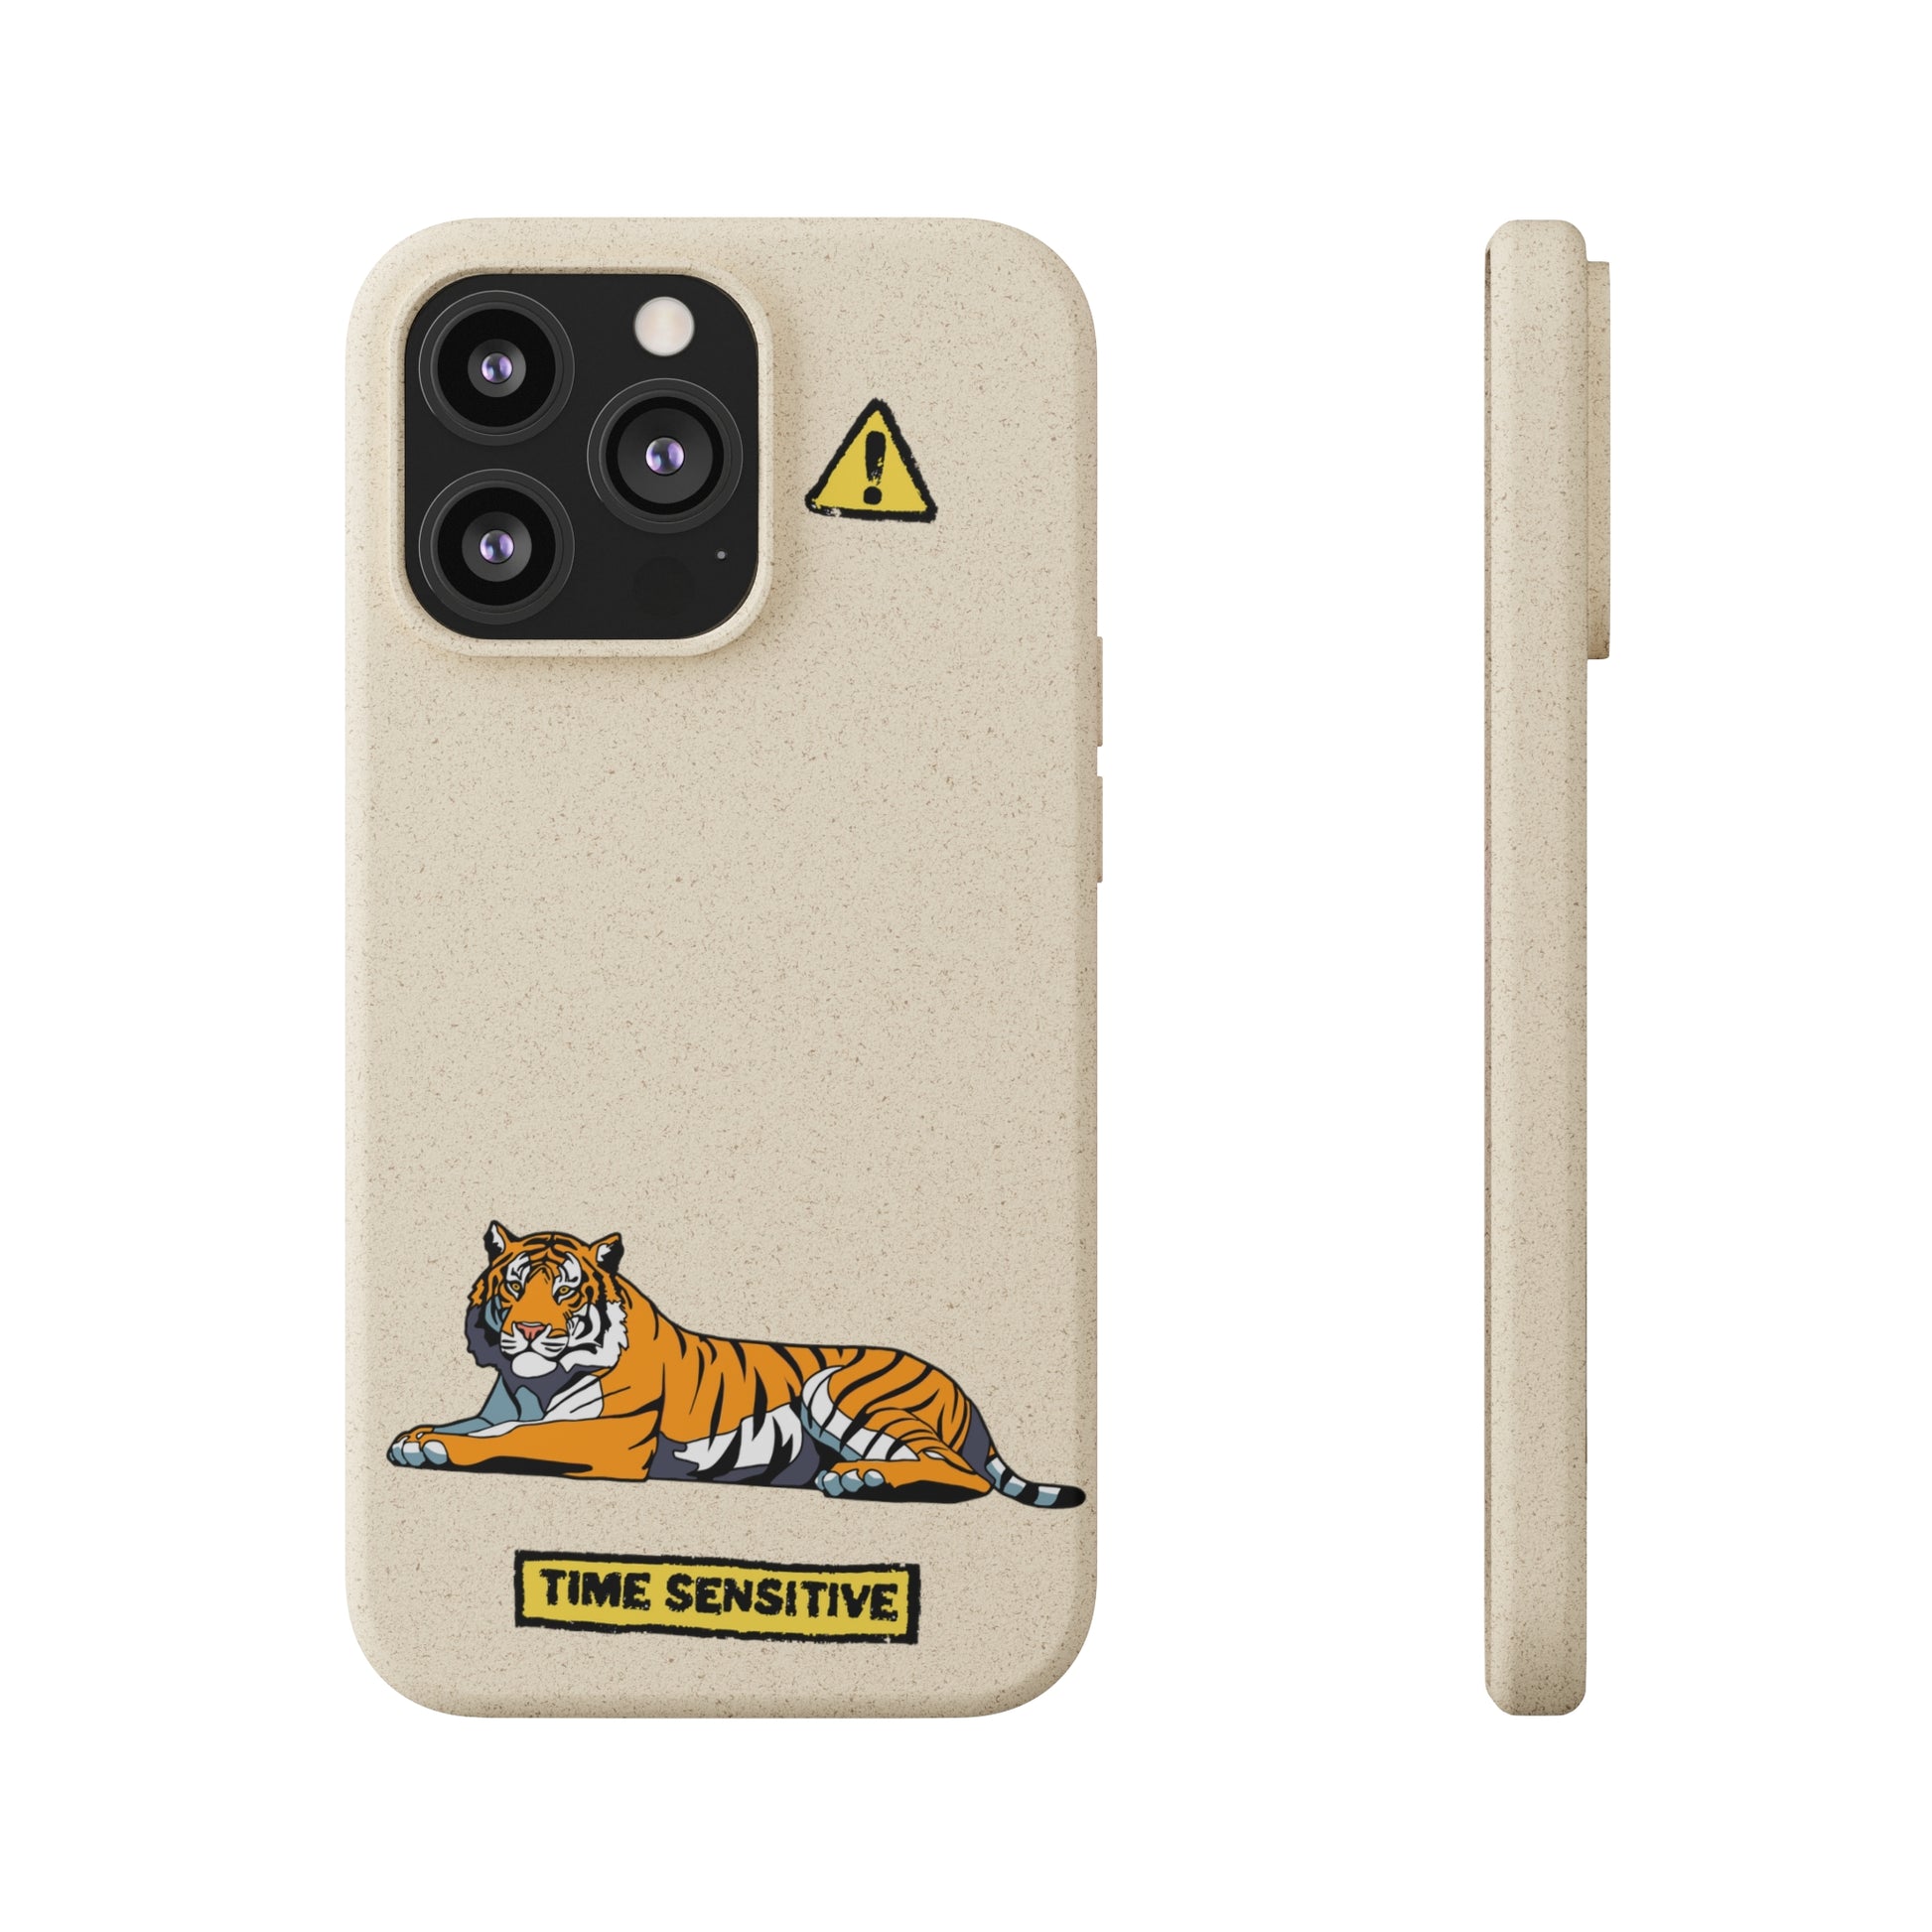 The back and side of The Tiger Phone Case, Tan, The artwork displayed is a Tiger laying down.